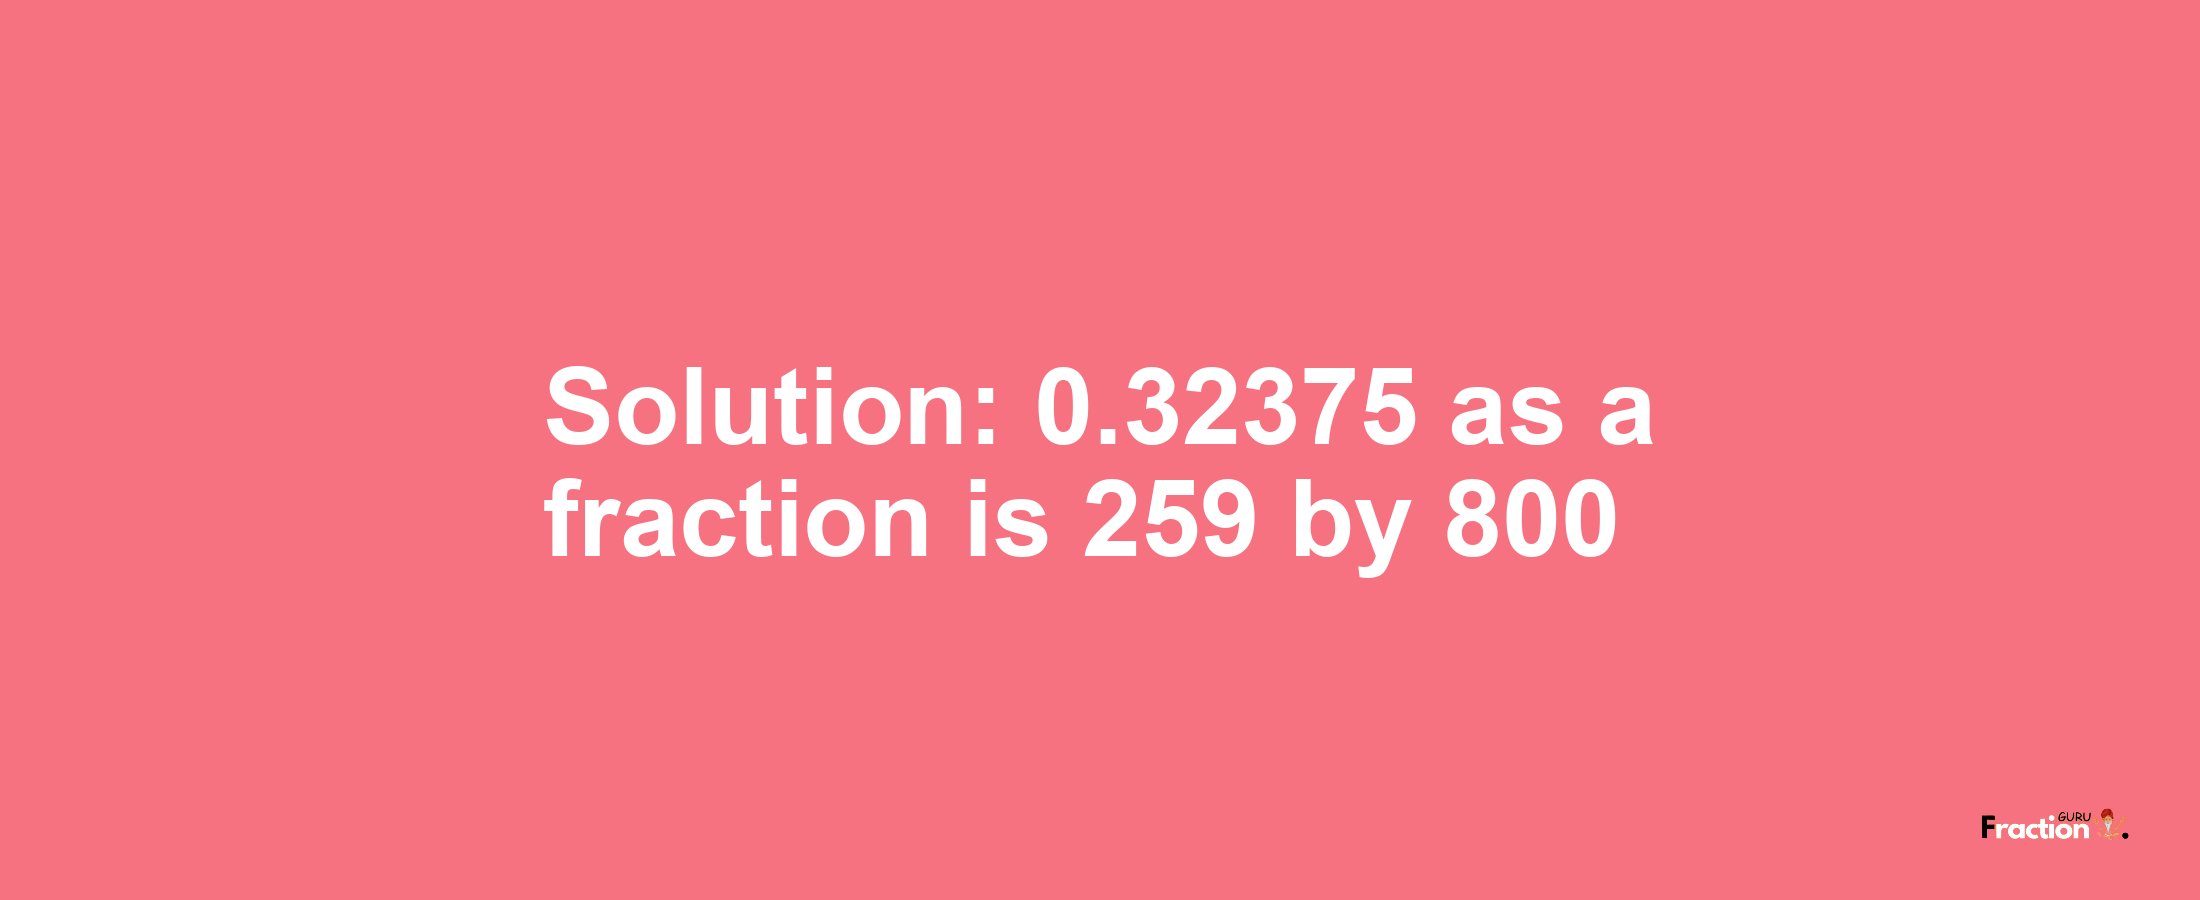 Solution:0.32375 as a fraction is 259/800